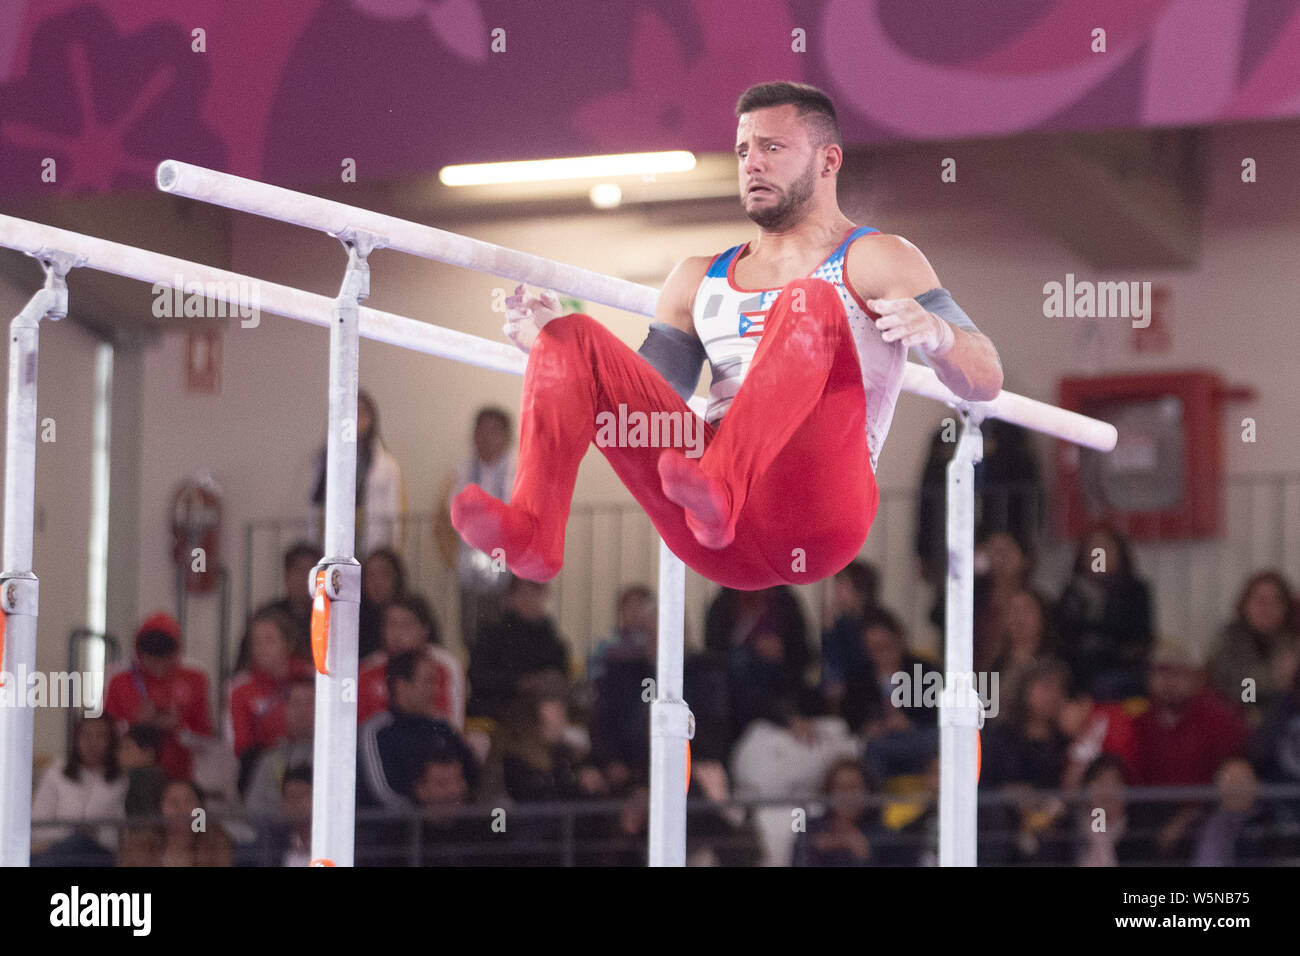 Lima, Peru. 28th July, 2019. Jose Lopez (#117) of Peru dismounts from the parallel bars during the Pan American Games Artistic Gymnastics, Men's Team Qualification and Final at Polideportivo Villa el Salvador in Lima, Peru. Daniel Lea/CSM/Alamy Live News Stock Photo